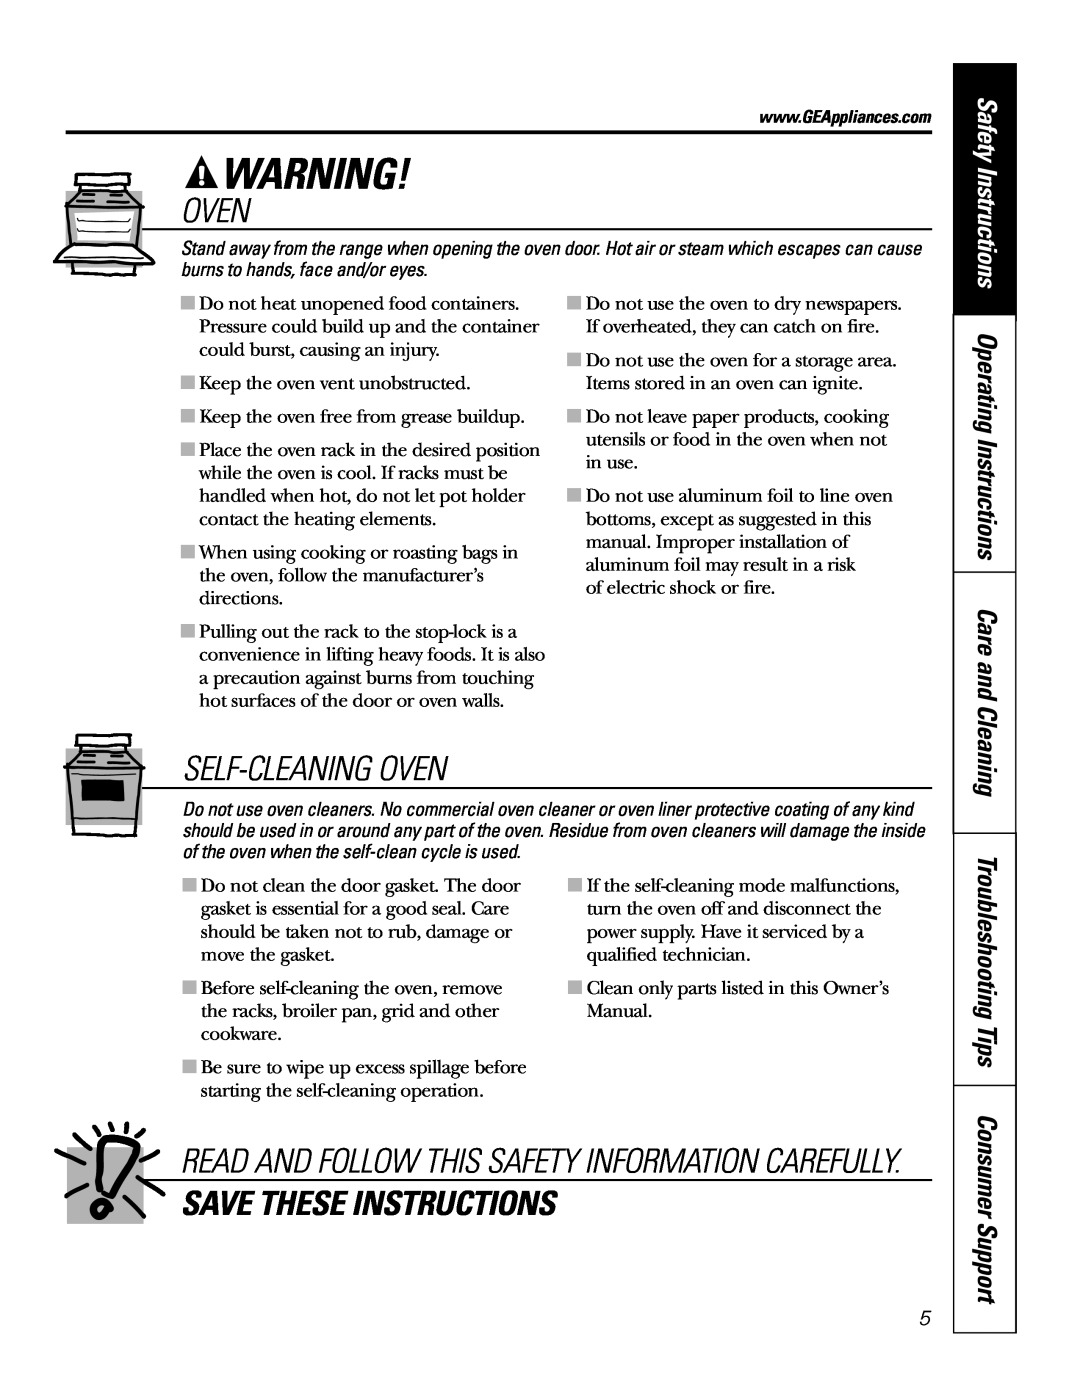 GE JSP57 Oven, Self-Cleaningoven, Save These Instructions, Troubleshooting Tips, Safety Instructions, Consumer Support 